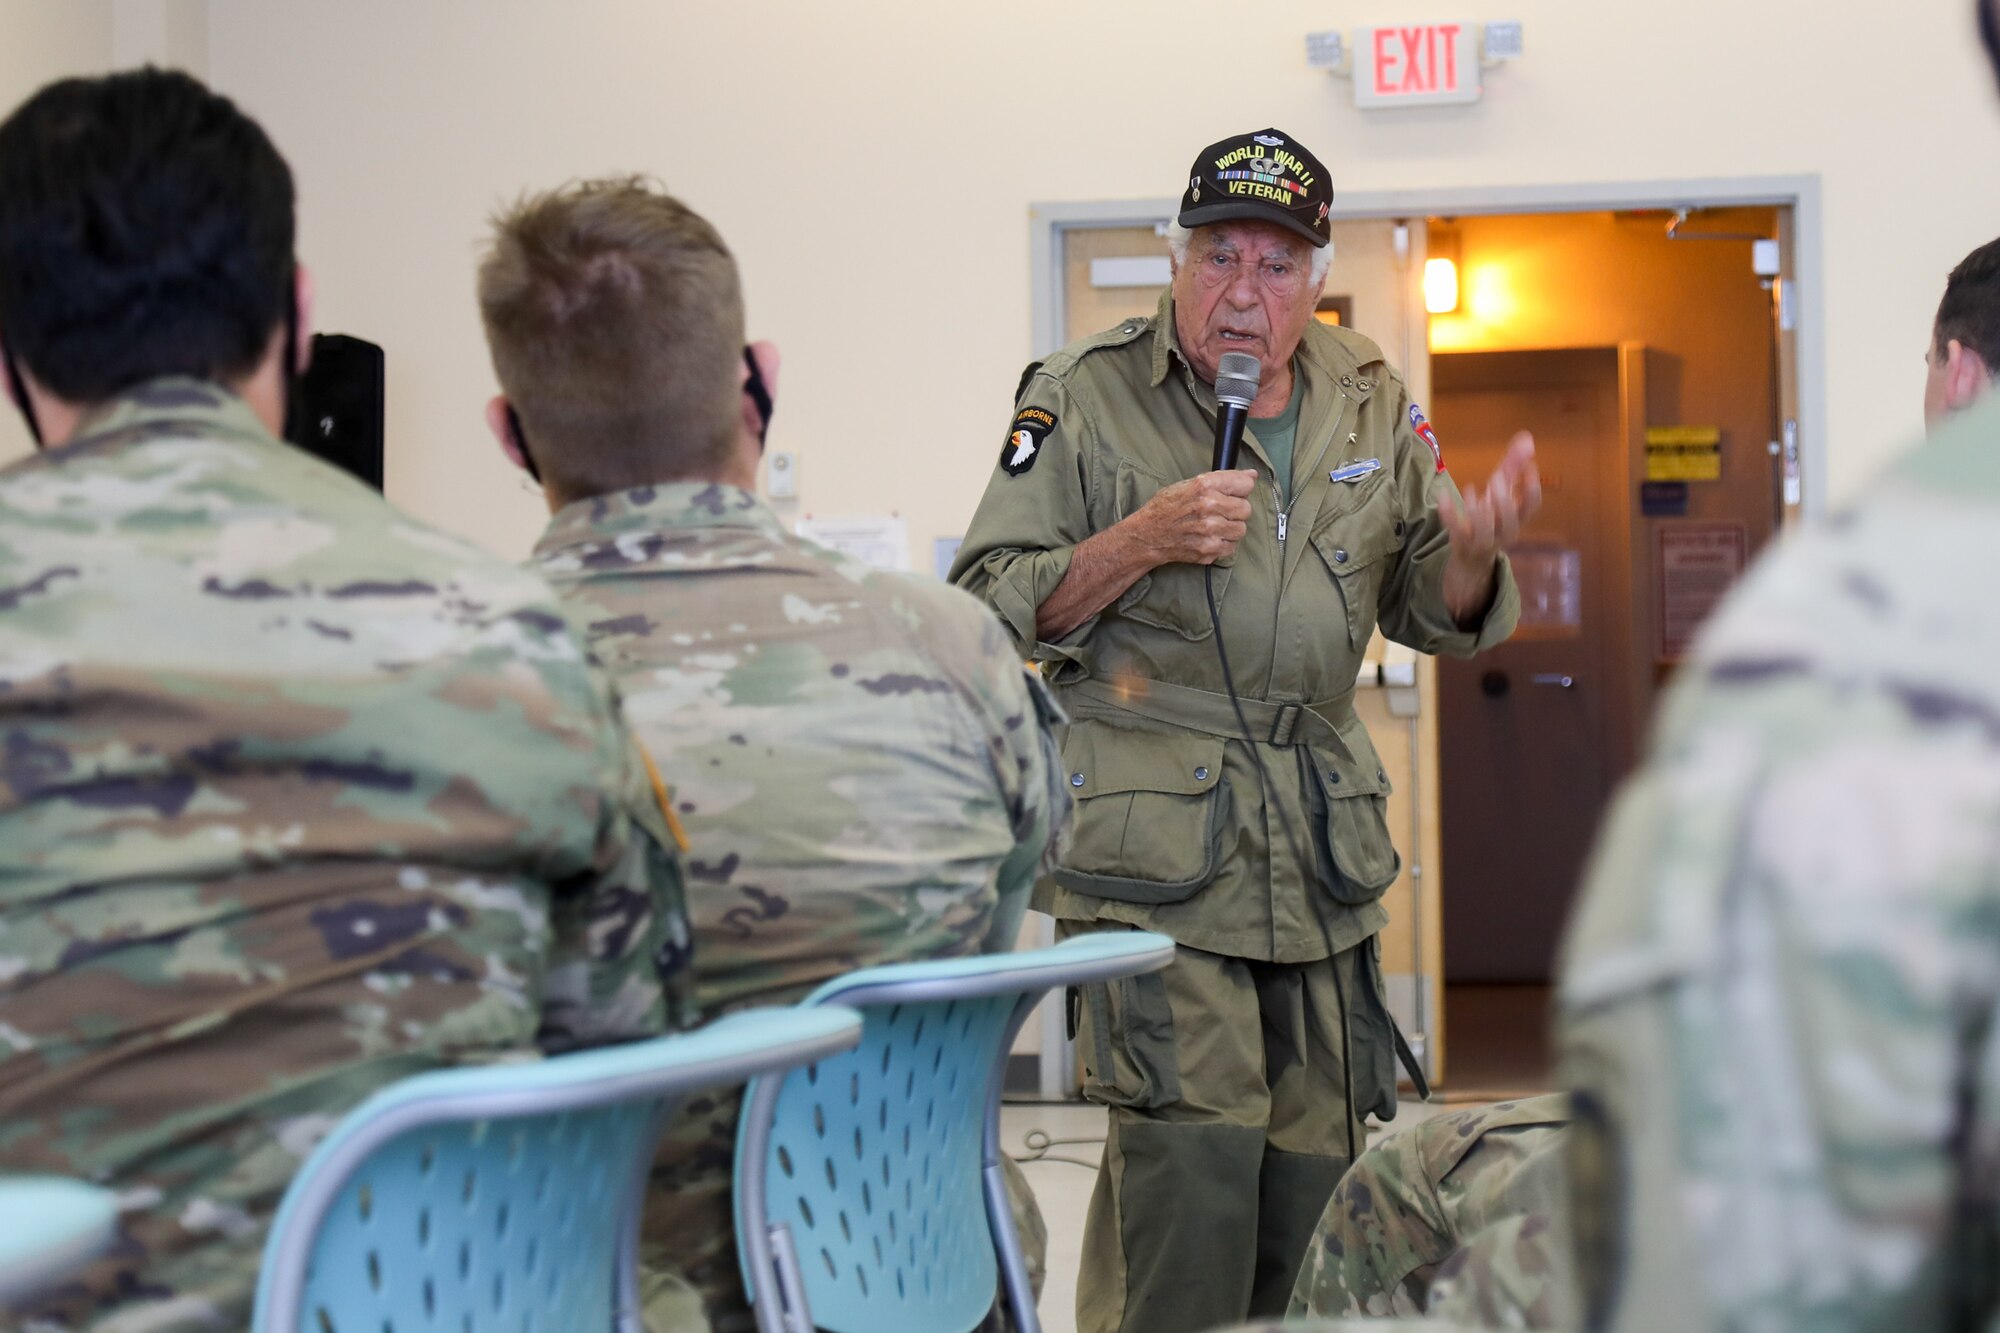 Vincent Speranza, World War II Veteran and machine gunner from the 501st Infantry Regiment, describes the extreme conditions he and his fellow paratroopers faced during the Battle of the Bulge to junior paratroopers of the 1st Battalion, 501st Infantry Regiment, during a visit to Joint Base Elmendorf-Richardson, July 15, 2021. Speranza traveled to JBER to meet and share stories about his World War II experiences with the paratroopers of the 1-501st PIR and the 4th Infantry Brigade Combat Team (Airborne), 25th Infantry Division, “Spartan Brigade.” The Spartan Brigade is the only airborne infantry brigade combat team in the Arctic and Pacific theaters, providing the combatant commander with the unique capability to project an expeditionary force by air.